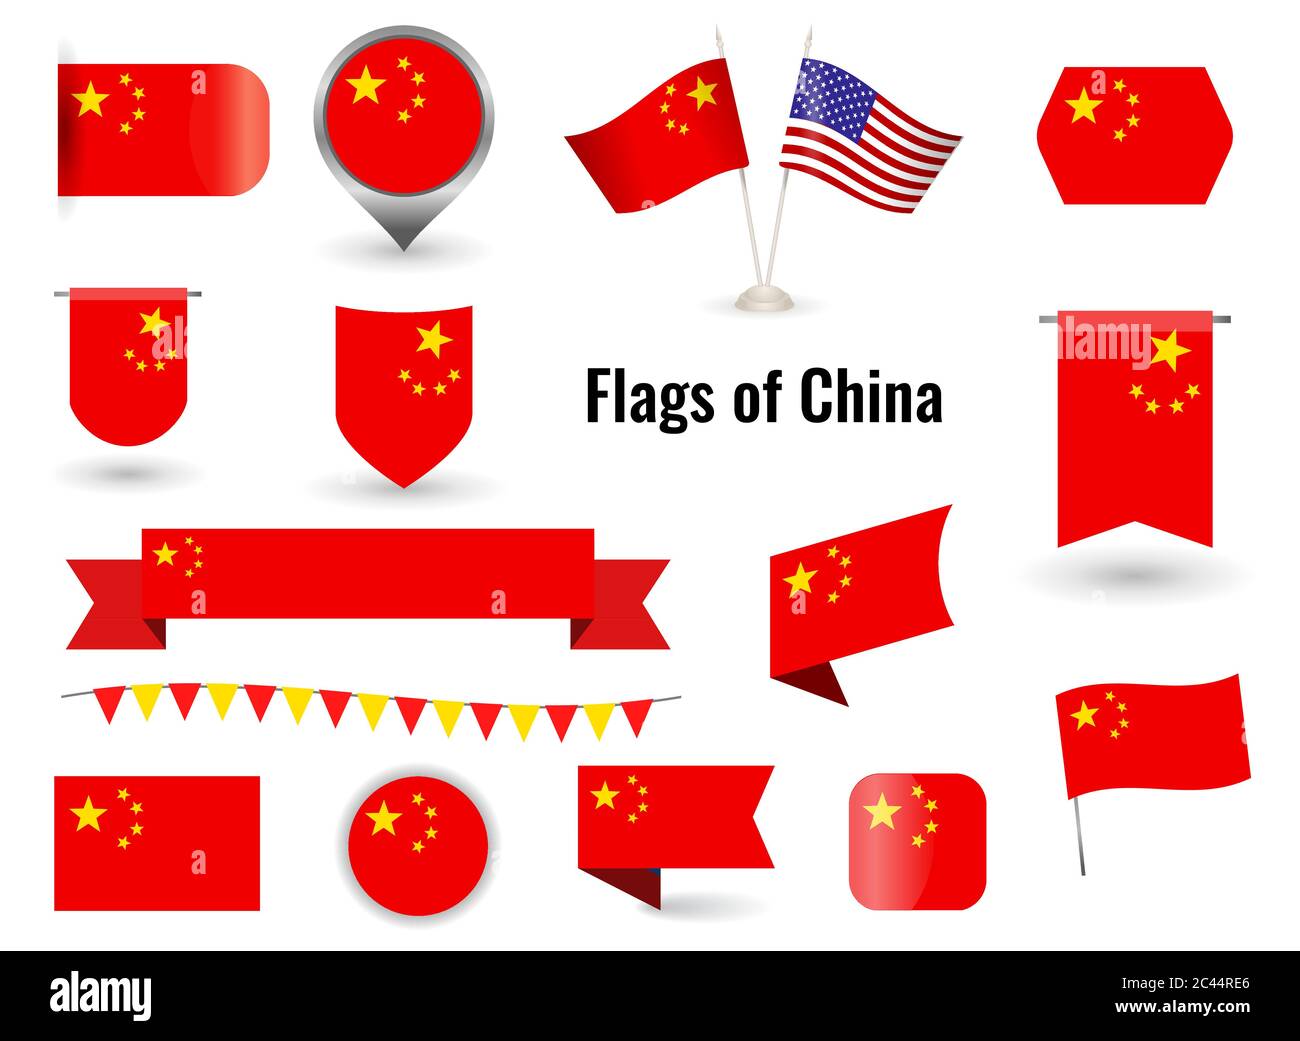 The Flag of China. Big set of icons and symbols. Square and round China flag. Collection of different flags of horizontal and vertical. vector illustr Stock Vector